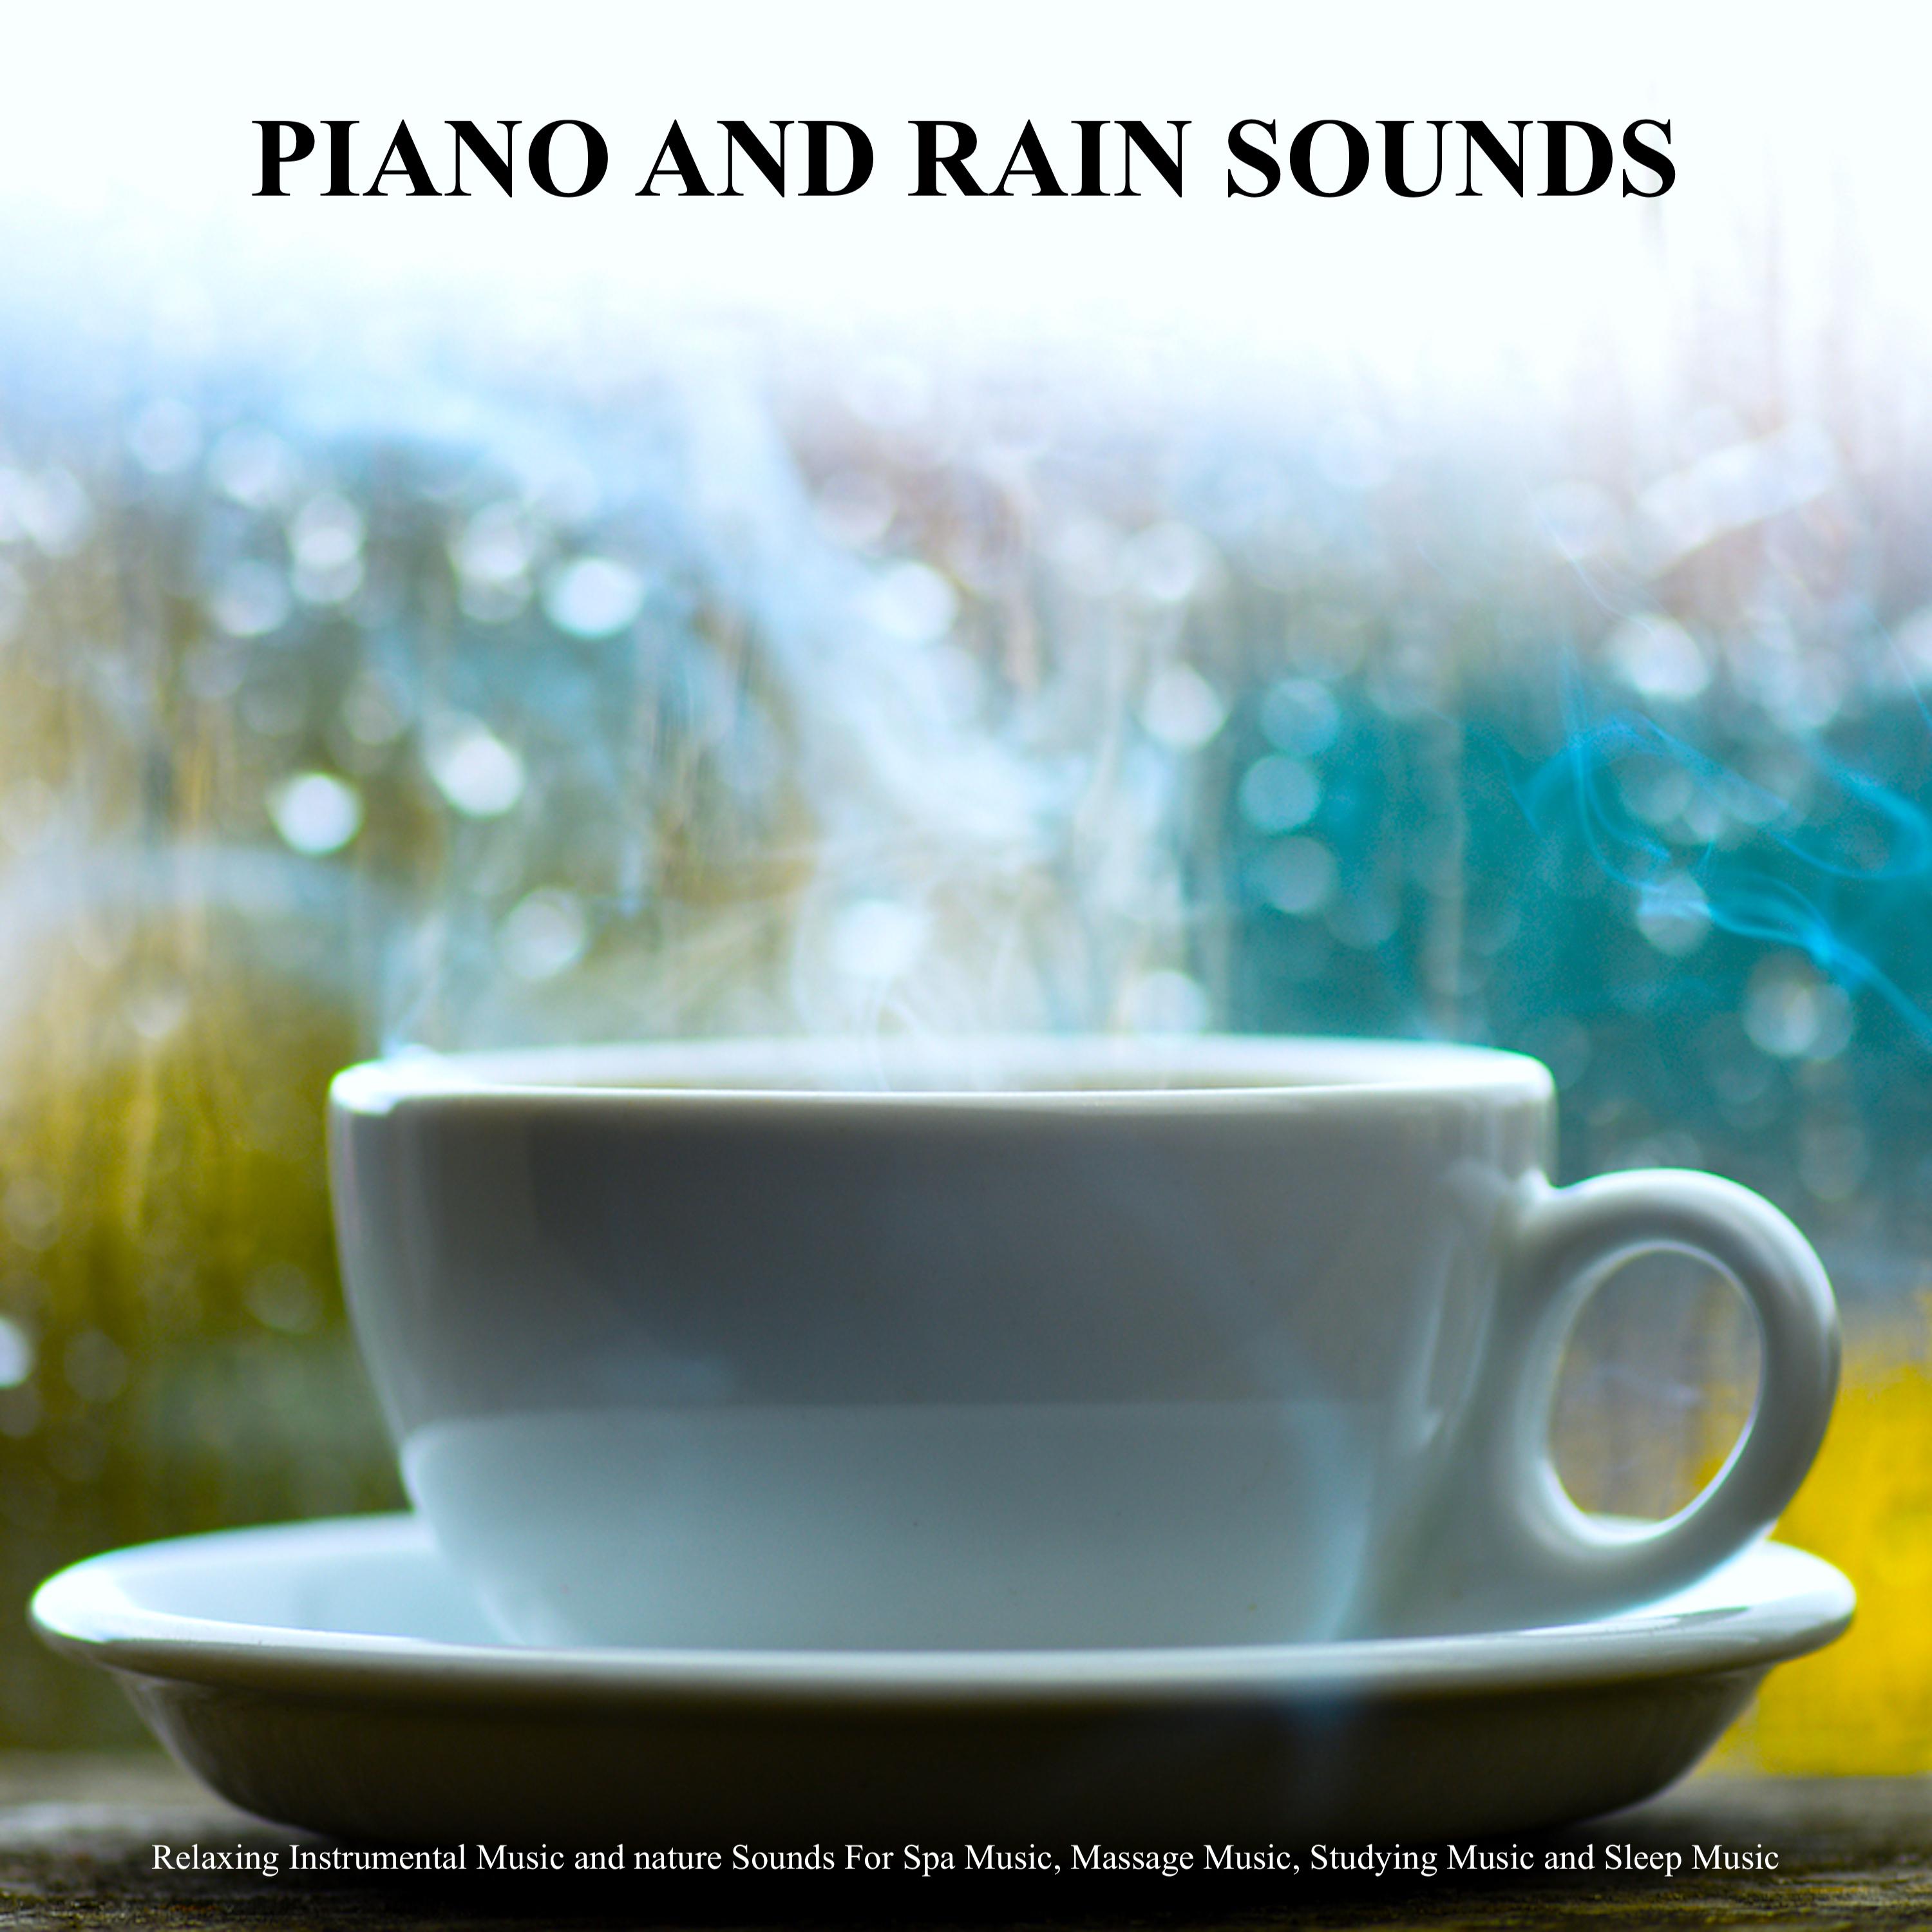 Background Piano and Rain Sounds for Studying